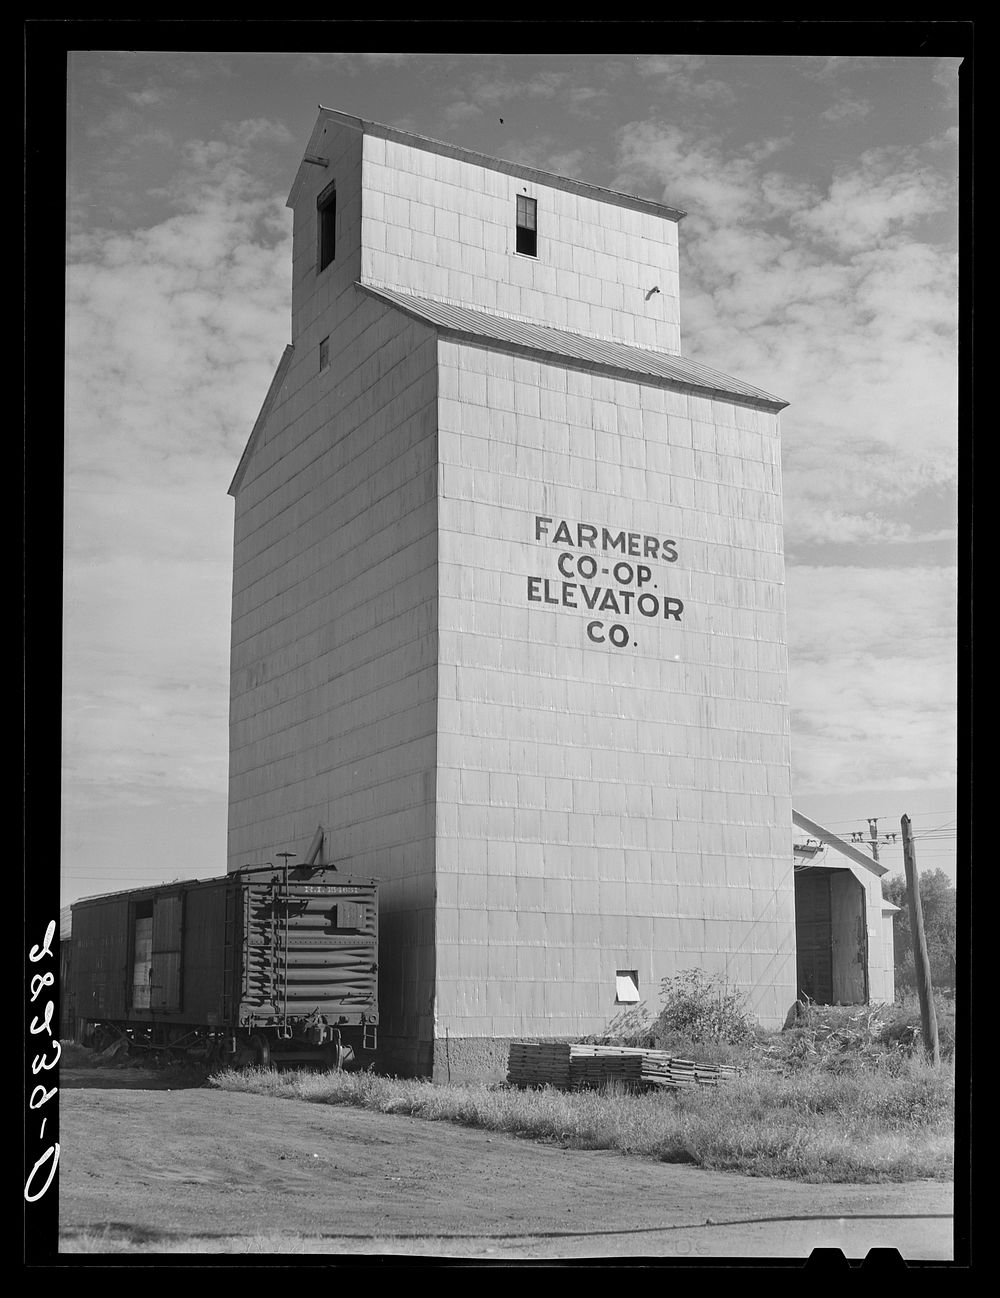 Farmers' elevator. Grundy Center, Iowa (cooperative elevator). Sourced from the Library of Congress.